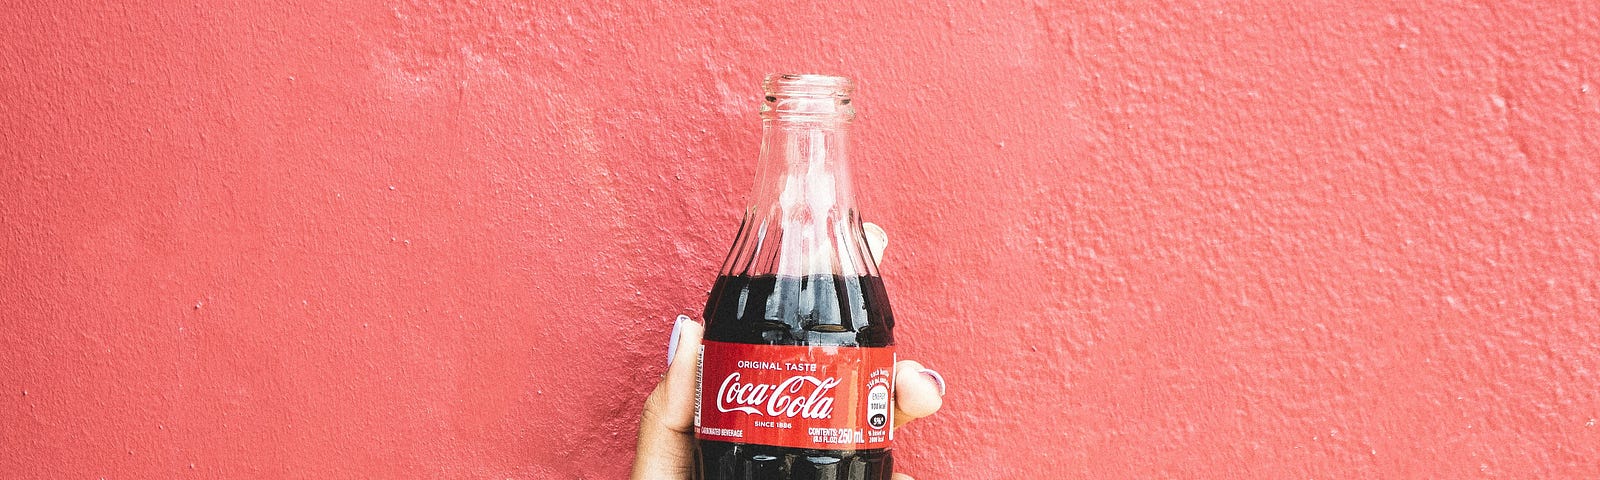 A hand holds a bottle of cola in a glass bottle against a red painted wall.